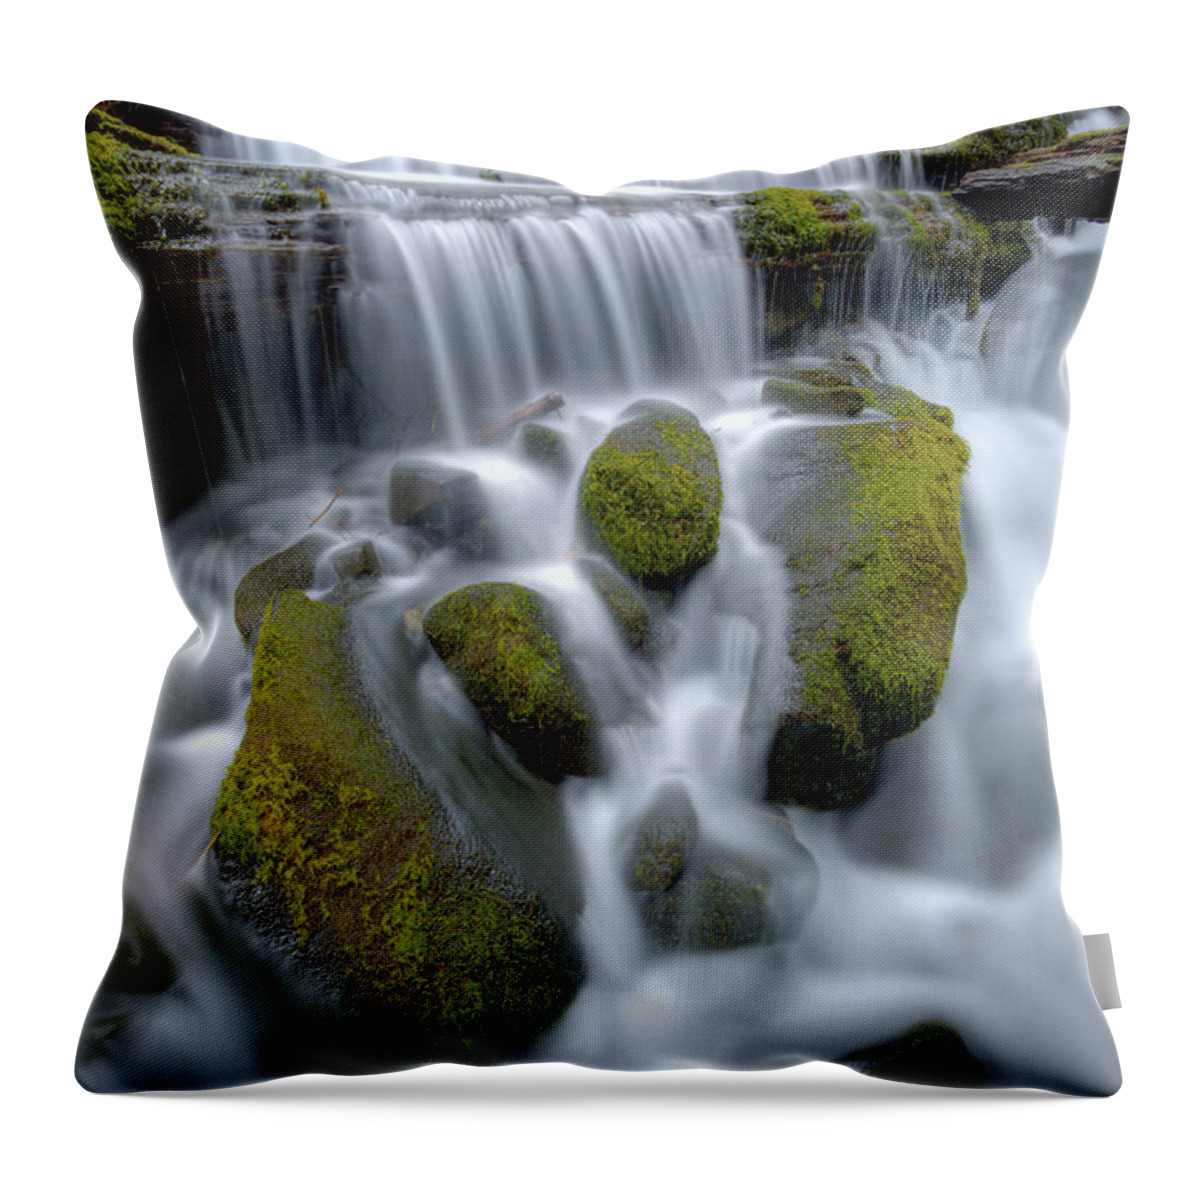 Waterfall Throw Pillow featuring the photograph Megaflow by Marco Crupi